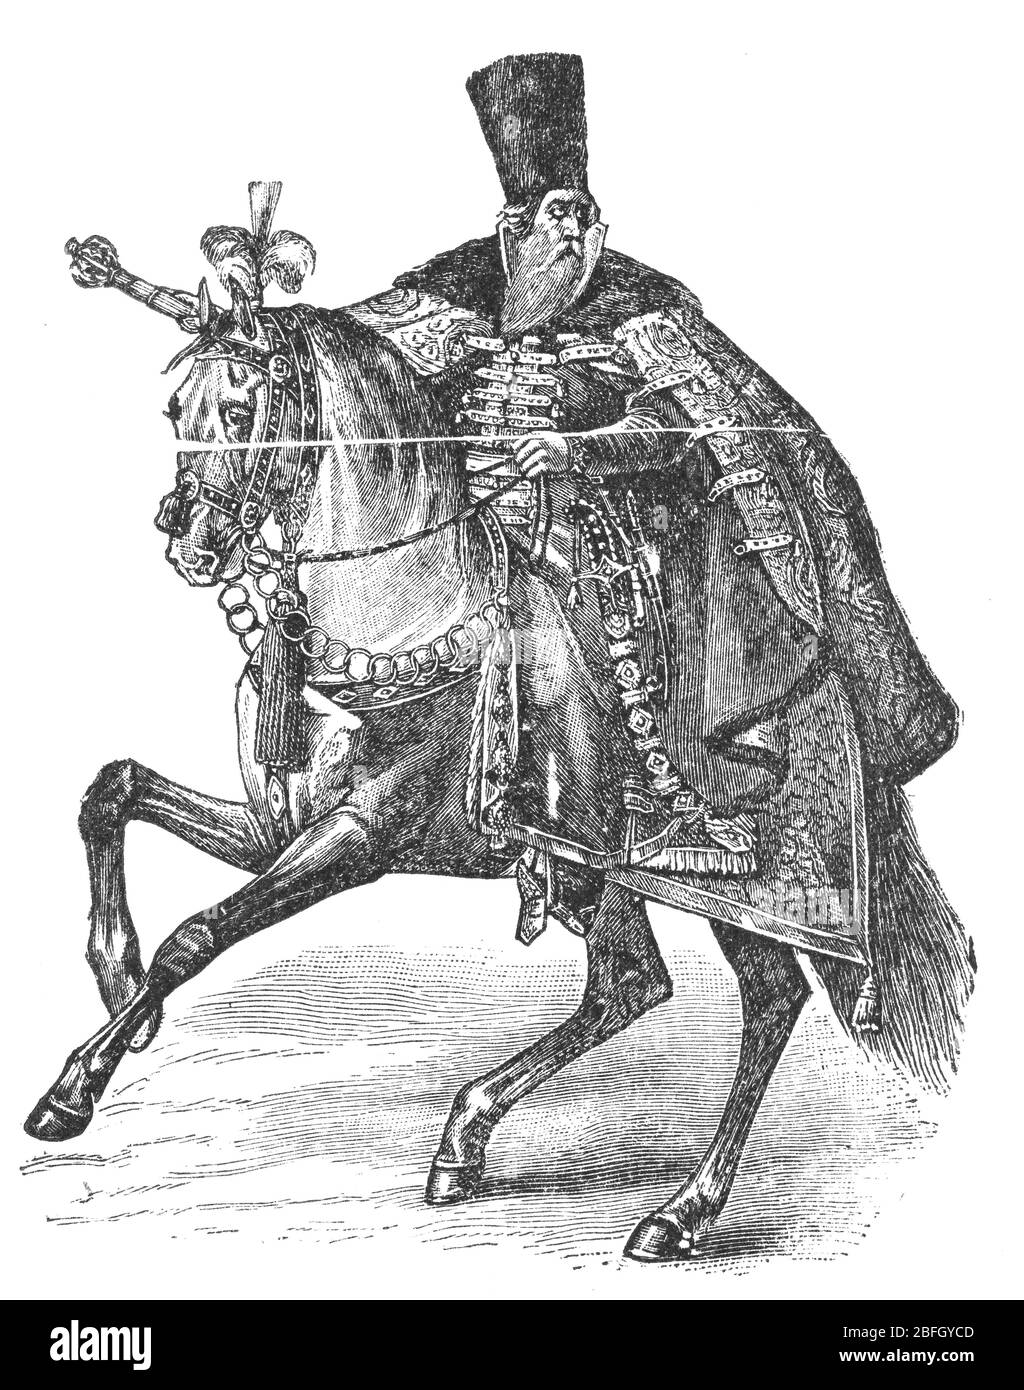 Russian military commander, 16th century, illustration from book dated 1916 Stock Photo